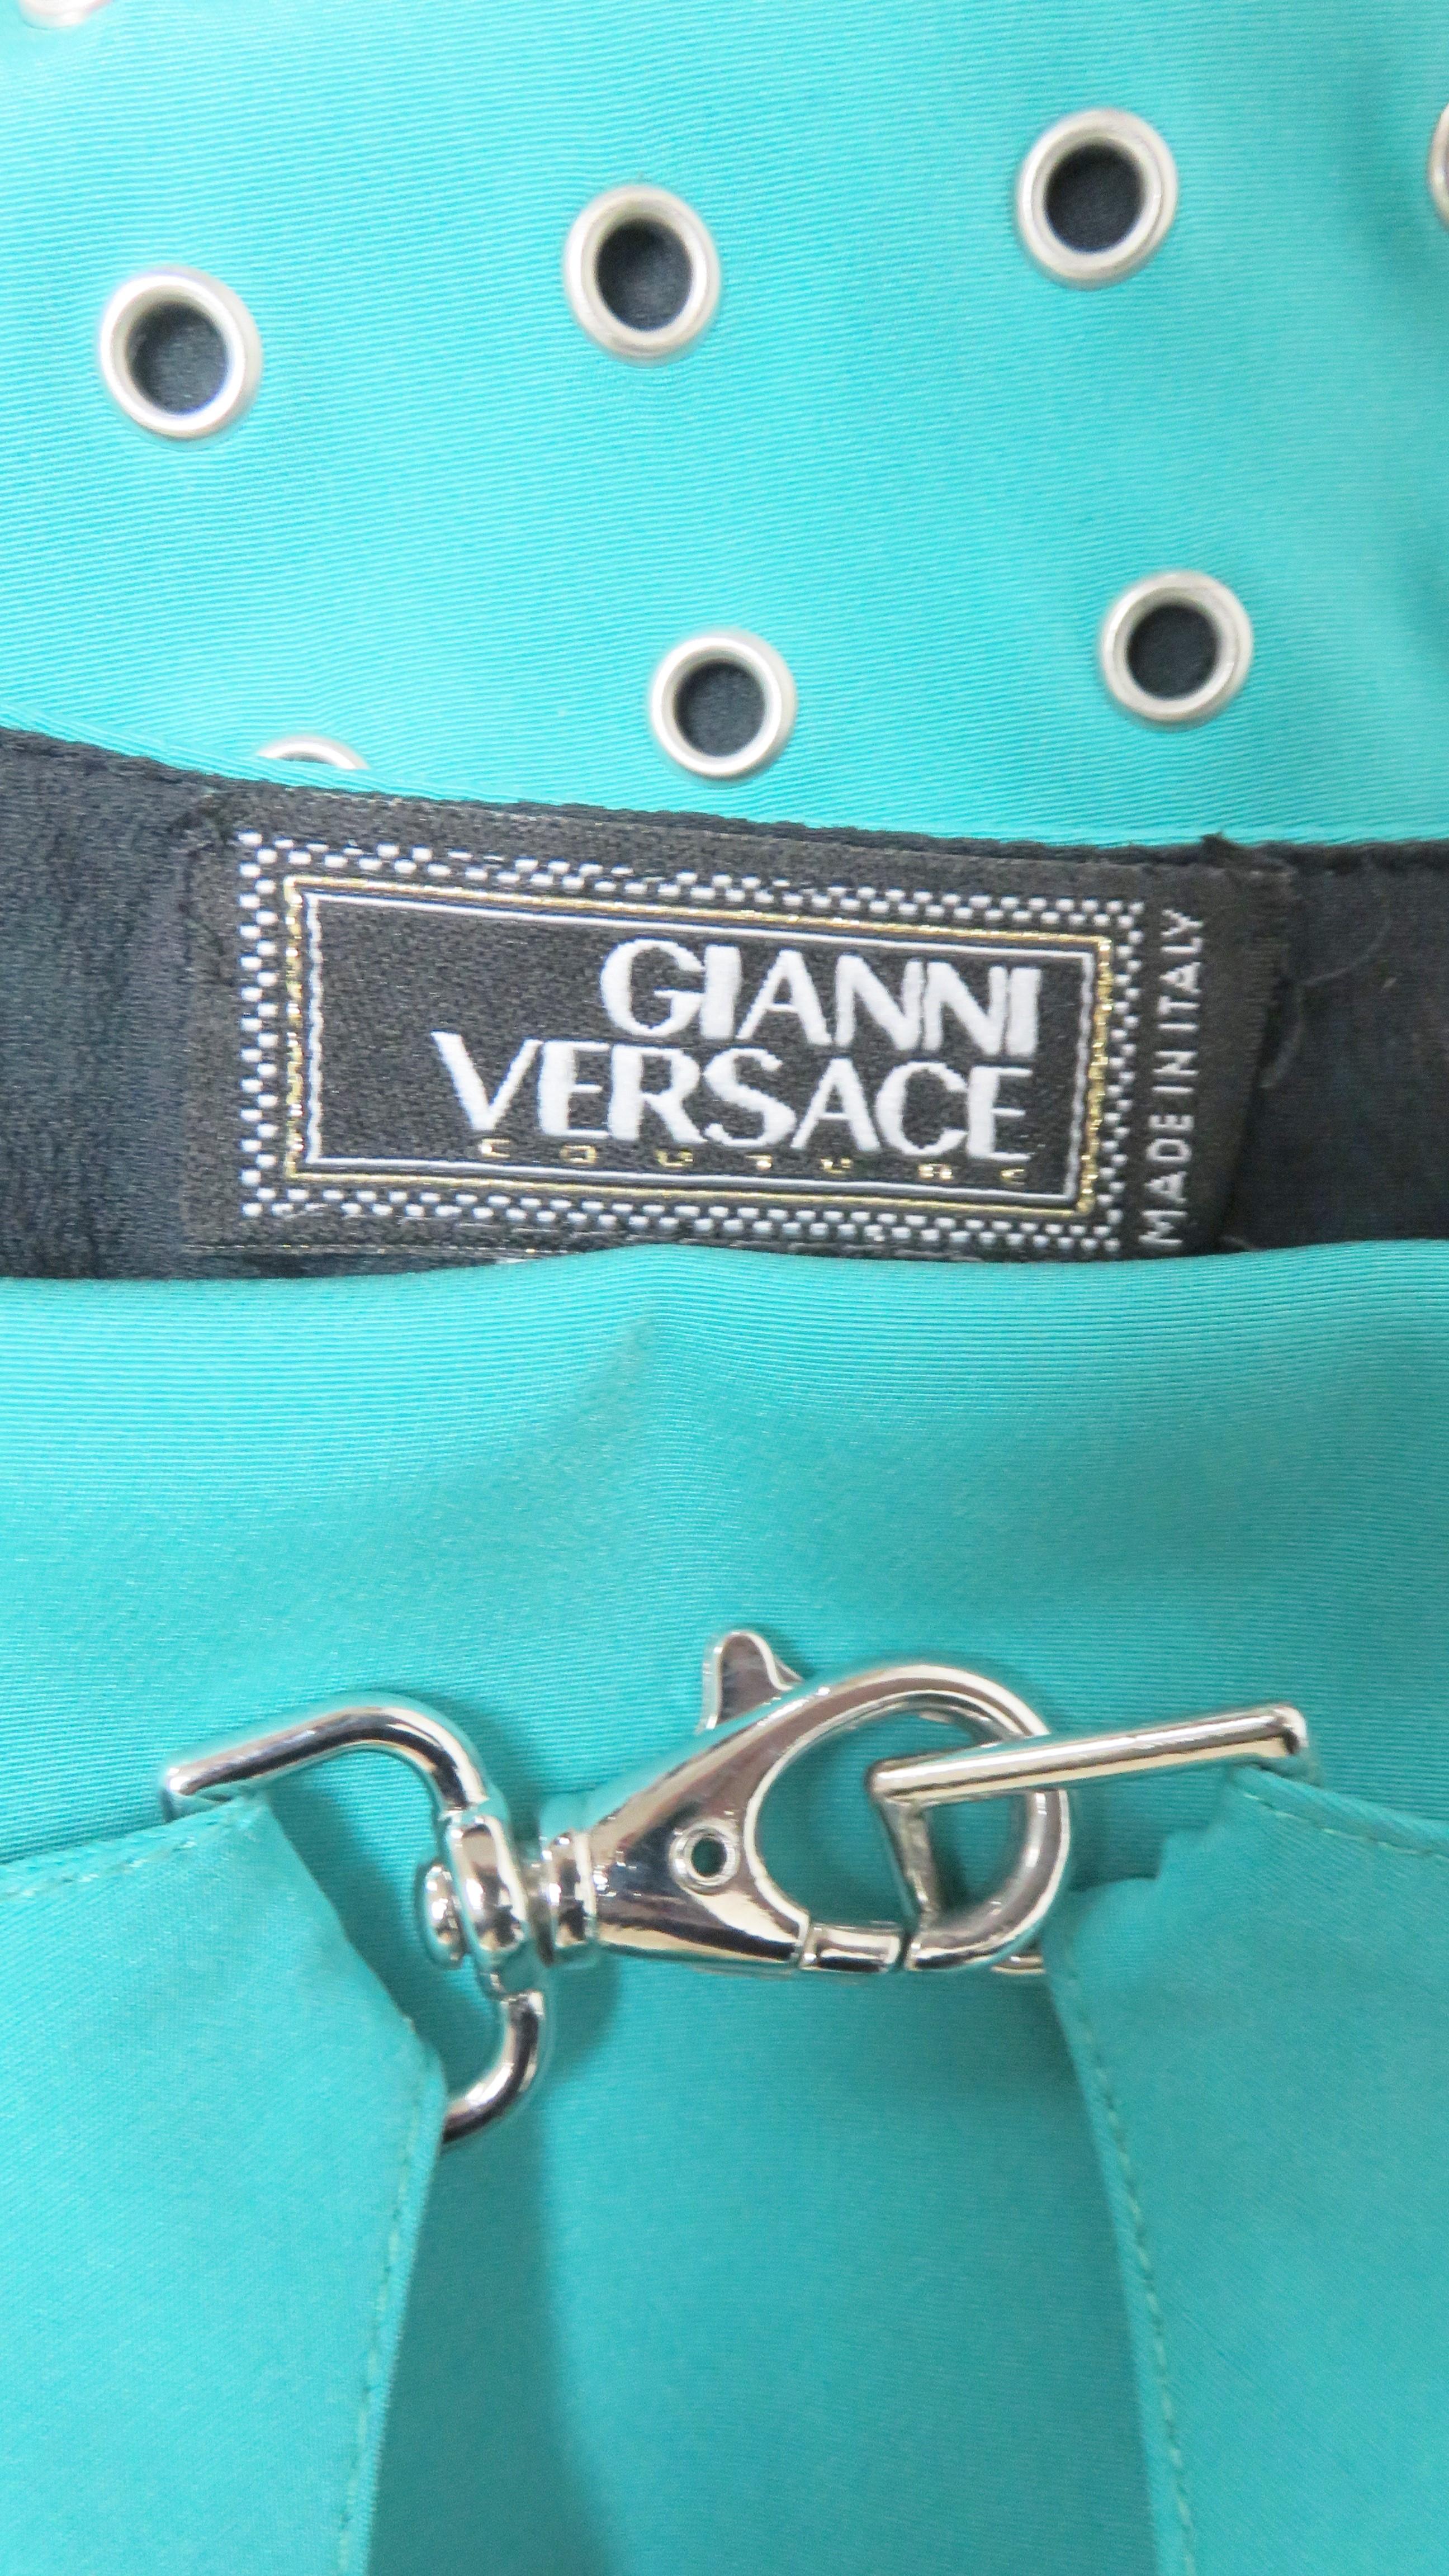 Gianni Versace Cut out Back Silk Dress with Grommets S/S 2003 For Sale 10